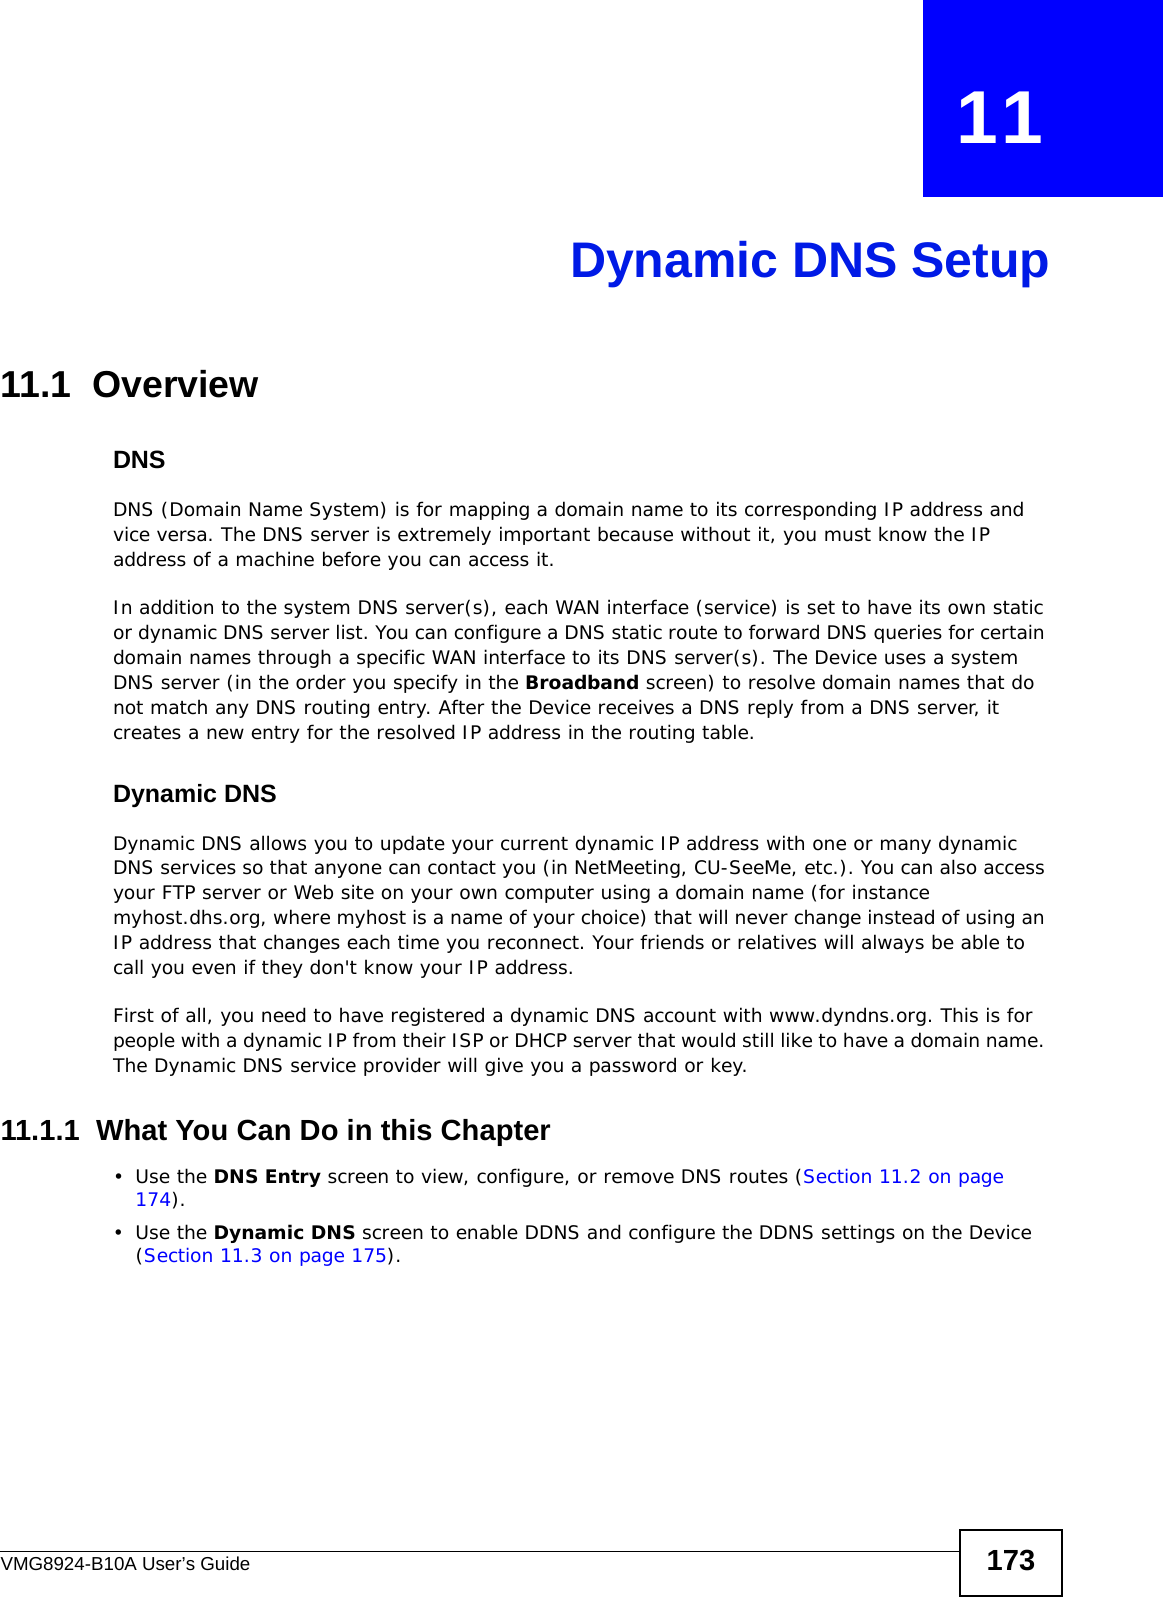 VMG8924-B10A User’s Guide 173CHAPTER   11Dynamic DNS Setup11.1  Overview DNSDNS (Domain Name System) is for mapping a domain name to its corresponding IP address and vice versa. The DNS server is extremely important because without it, you must know the IP address of a machine before you can access it. In addition to the system DNS server(s), each WAN interface (service) is set to have its own static or dynamic DNS server list. You can configure a DNS static route to forward DNS queries for certain domain names through a specific WAN interface to its DNS server(s). The Device uses a system DNS server (in the order you specify in the Broadband screen) to resolve domain names that do not match any DNS routing entry. After the Device receives a DNS reply from a DNS server, it creates a new entry for the resolved IP address in the routing table.Dynamic DNSDynamic DNS allows you to update your current dynamic IP address with one or many dynamic DNS services so that anyone can contact you (in NetMeeting, CU-SeeMe, etc.). You can also access your FTP server or Web site on your own computer using a domain name (for instance myhost.dhs.org, where myhost is a name of your choice) that will never change instead of using an IP address that changes each time you reconnect. Your friends or relatives will always be able to call you even if they don&apos;t know your IP address.First of all, you need to have registered a dynamic DNS account with www.dyndns.org. This is for people with a dynamic IP from their ISP or DHCP server that would still like to have a domain name. The Dynamic DNS service provider will give you a password or key. 11.1.1  What You Can Do in this Chapter•Use the DNS Entry screen to view, configure, or remove DNS routes (Section 11.2 on page 174).•Use the Dynamic DNS screen to enable DDNS and configure the DDNS settings on the Device (Section 11.3 on page 175).